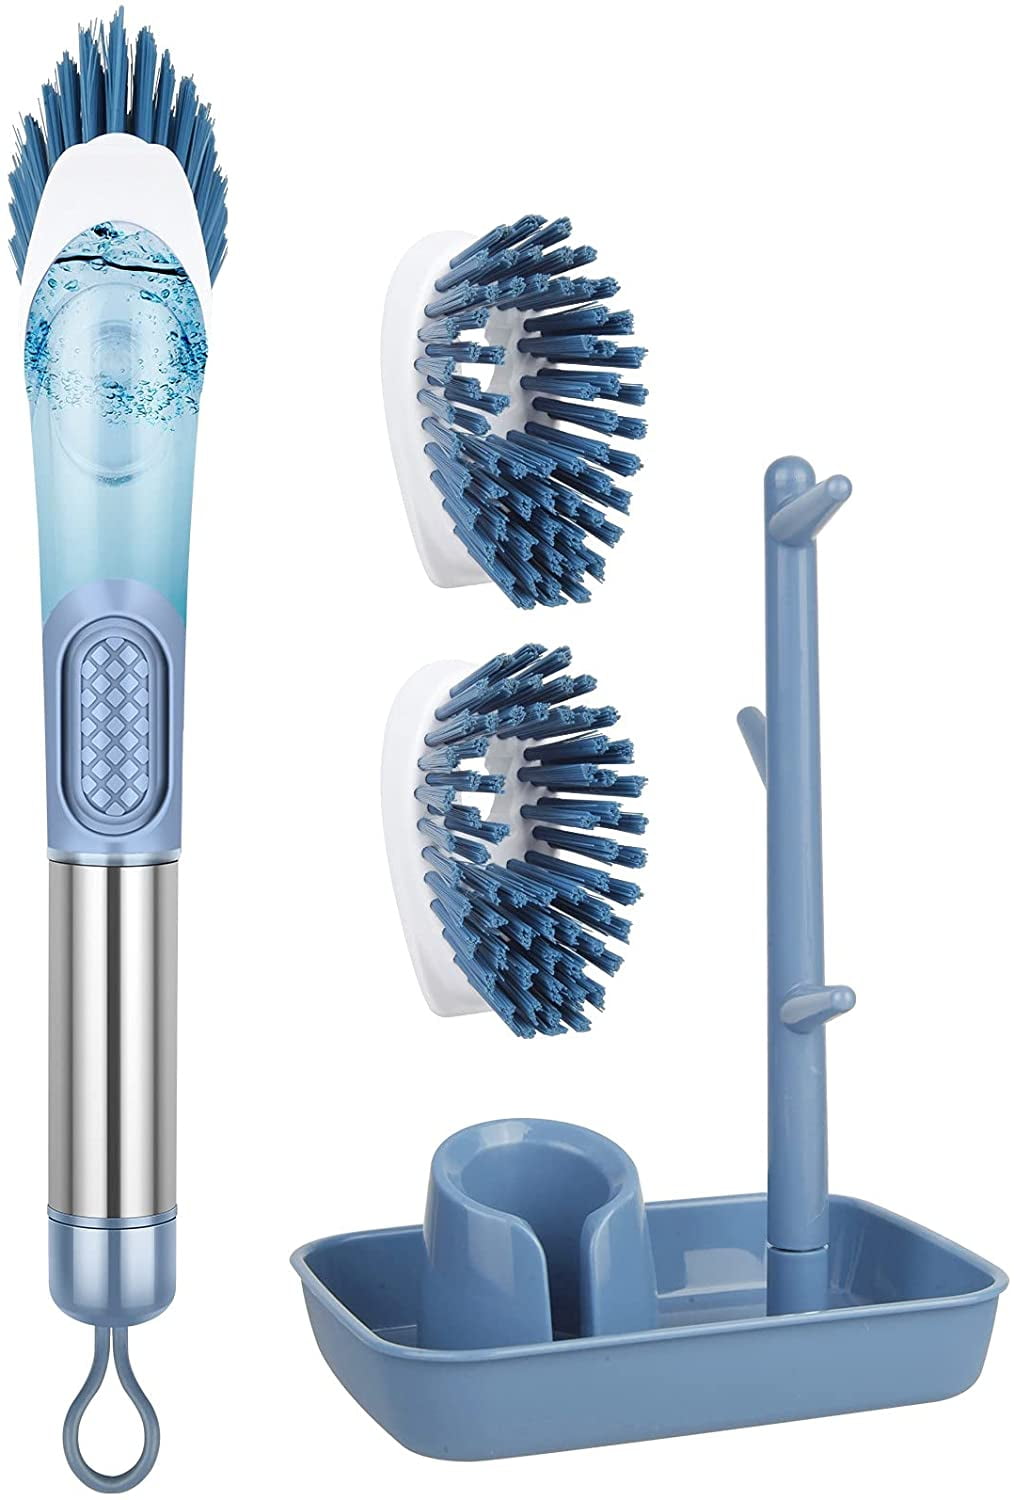 SUGARDAY Dish Brush with Soap Dispenser Kitchen Scrub Brush with 3 Brush  Replacement Heads for Pot Pan Sink Cleaning 